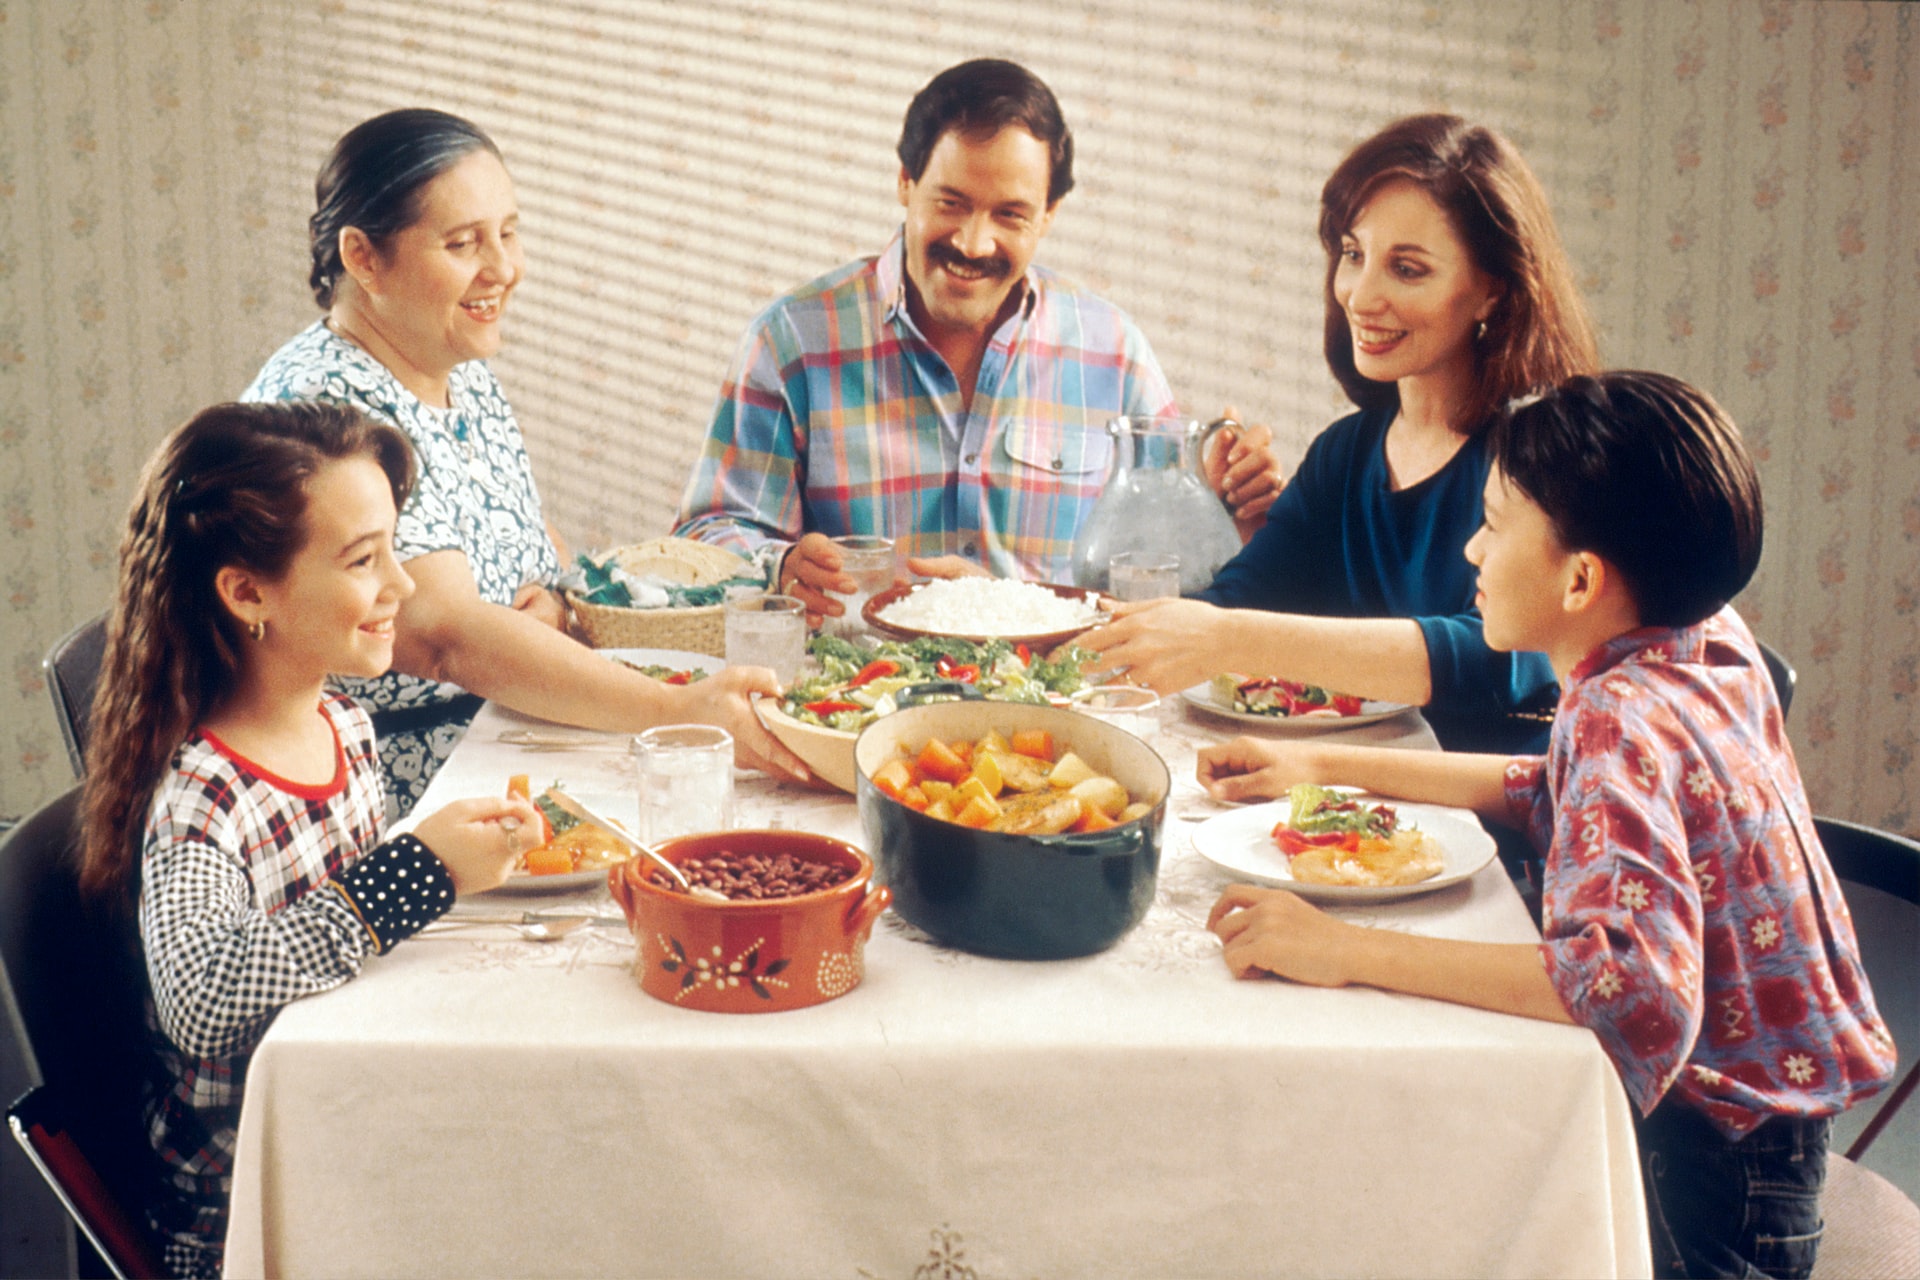 Family dinners are good for our health—and it’s not just because of the food